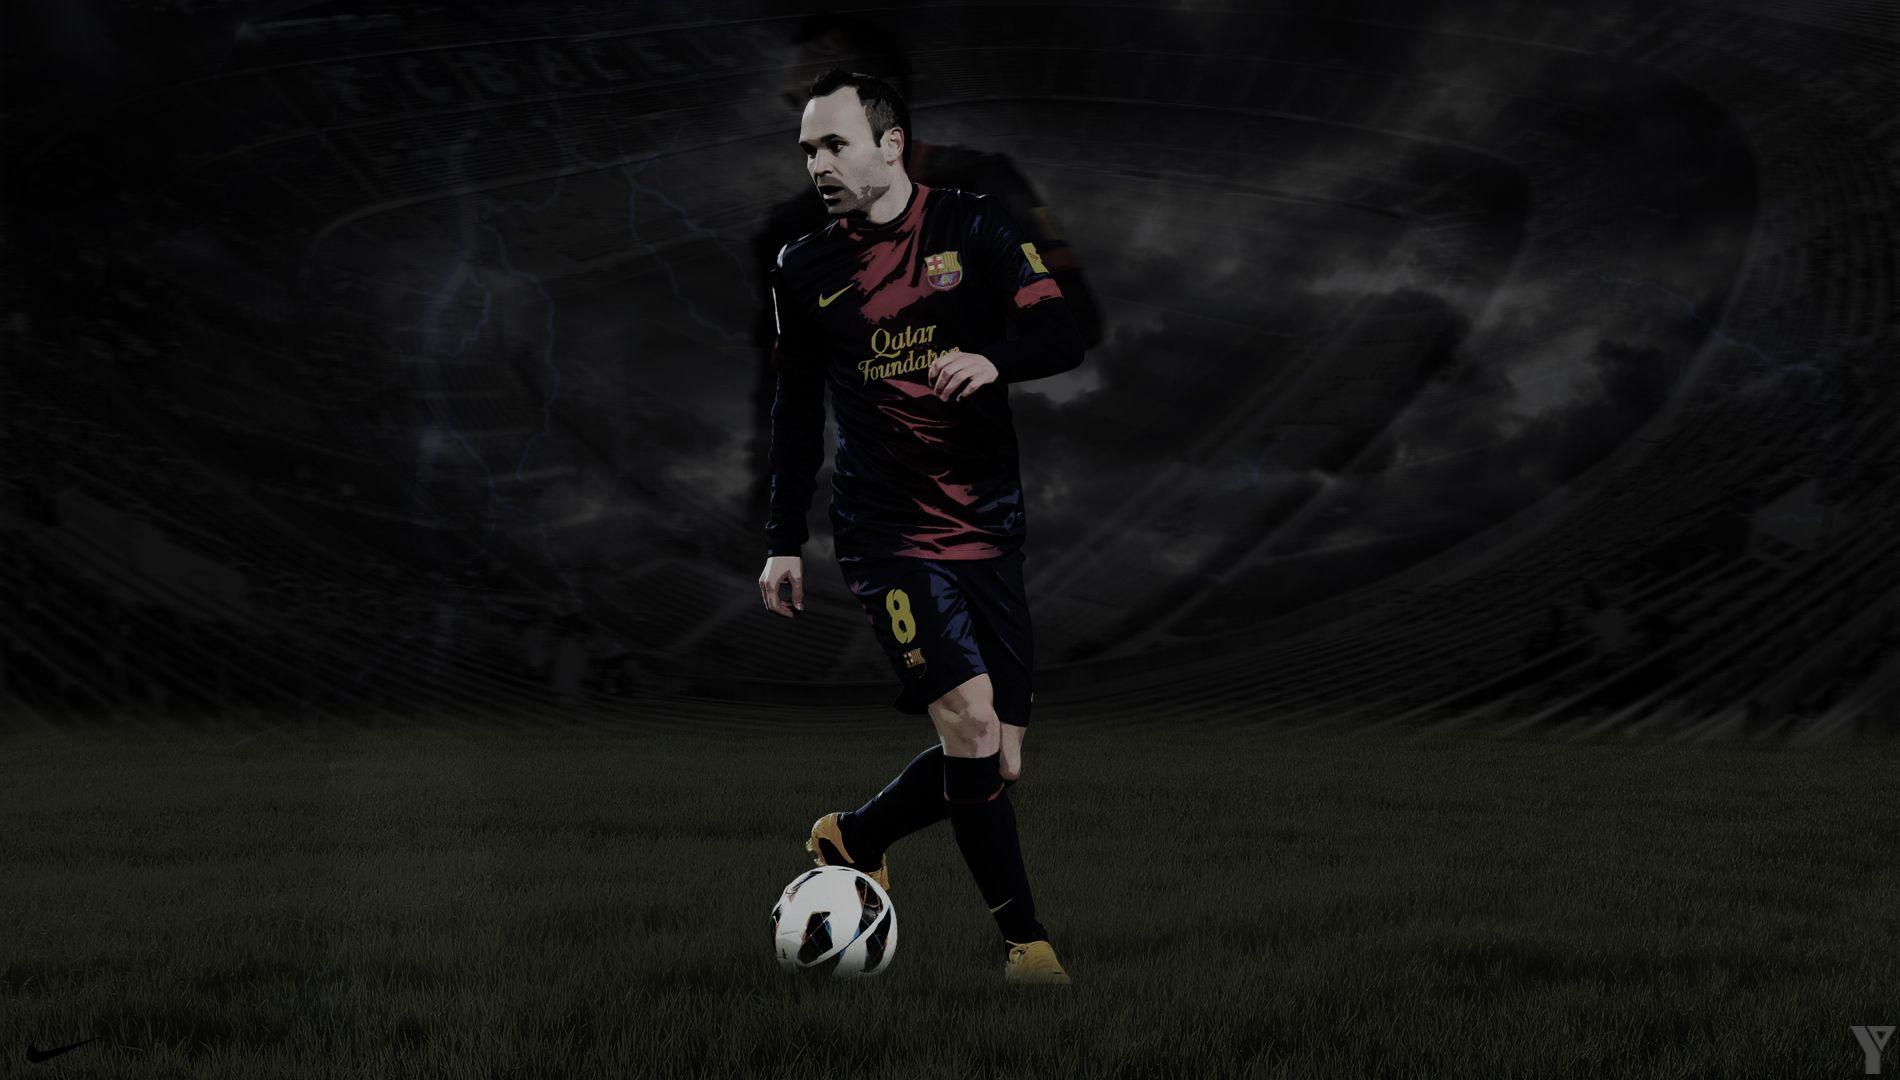 Andres Iniesta Wallpaper High Quality